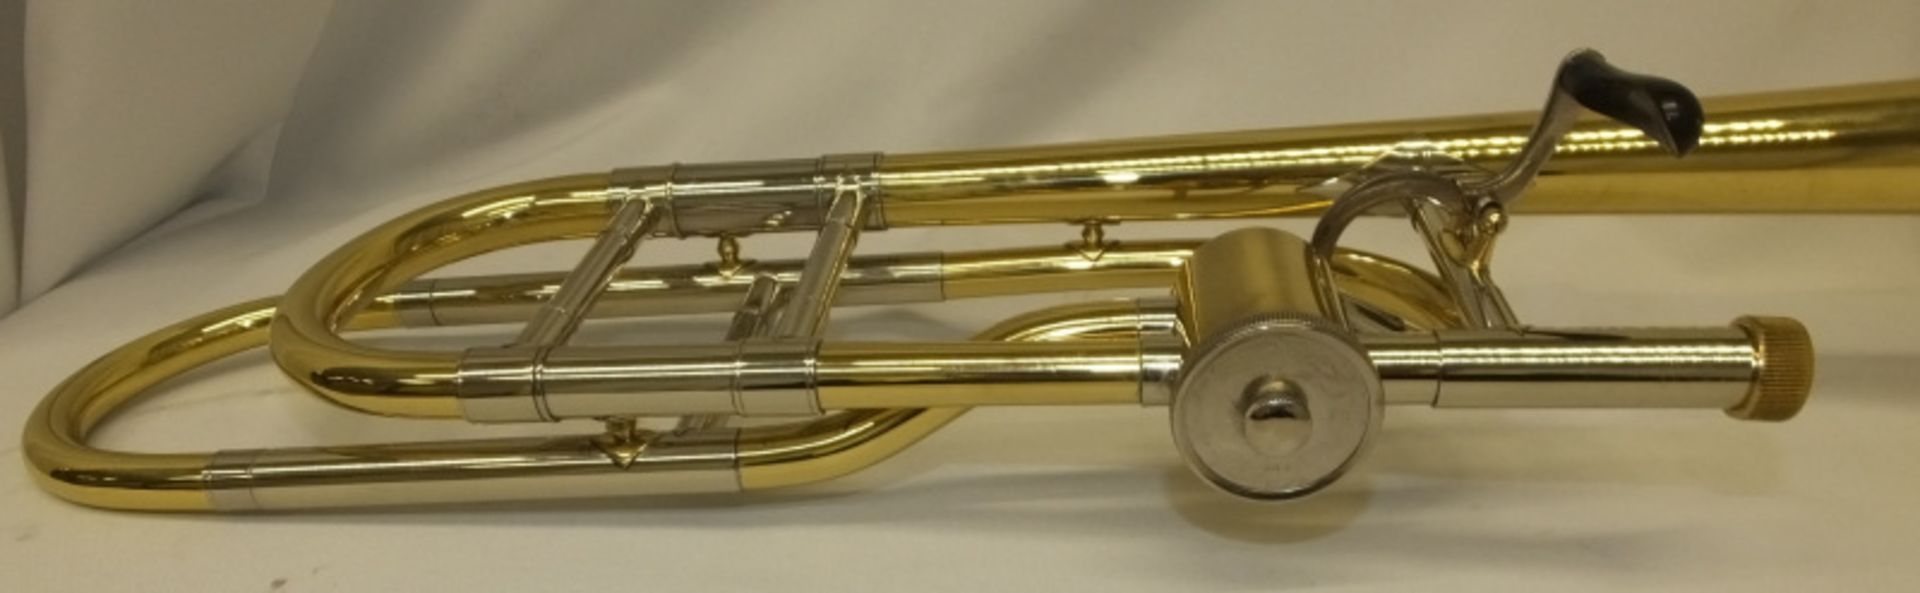 Gear 4 Music Trombone in case - Please check photos carefully - Image 5 of 11